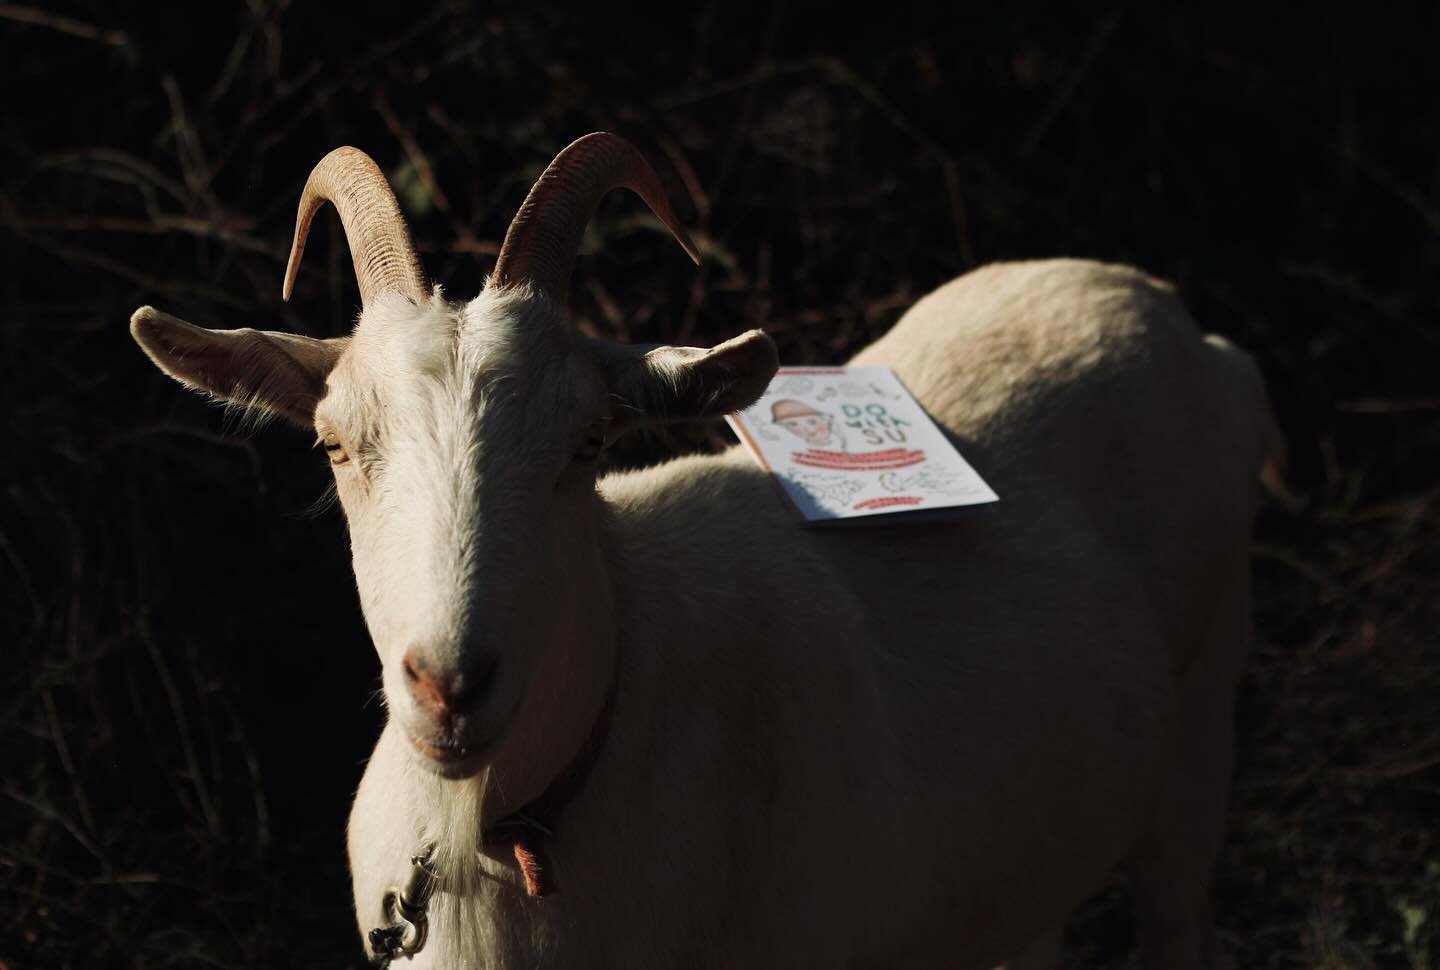 Giveaway! 🥳

If you&rsquo;d like to win a copy of my limited-run zine in honour of permaculture&rsquo;s most radical grandma Su Dennett, roll on over to @retrosuburbiaofficial and await further orders.
 
📸 This is Charlie, my #1 goat and forbidden 